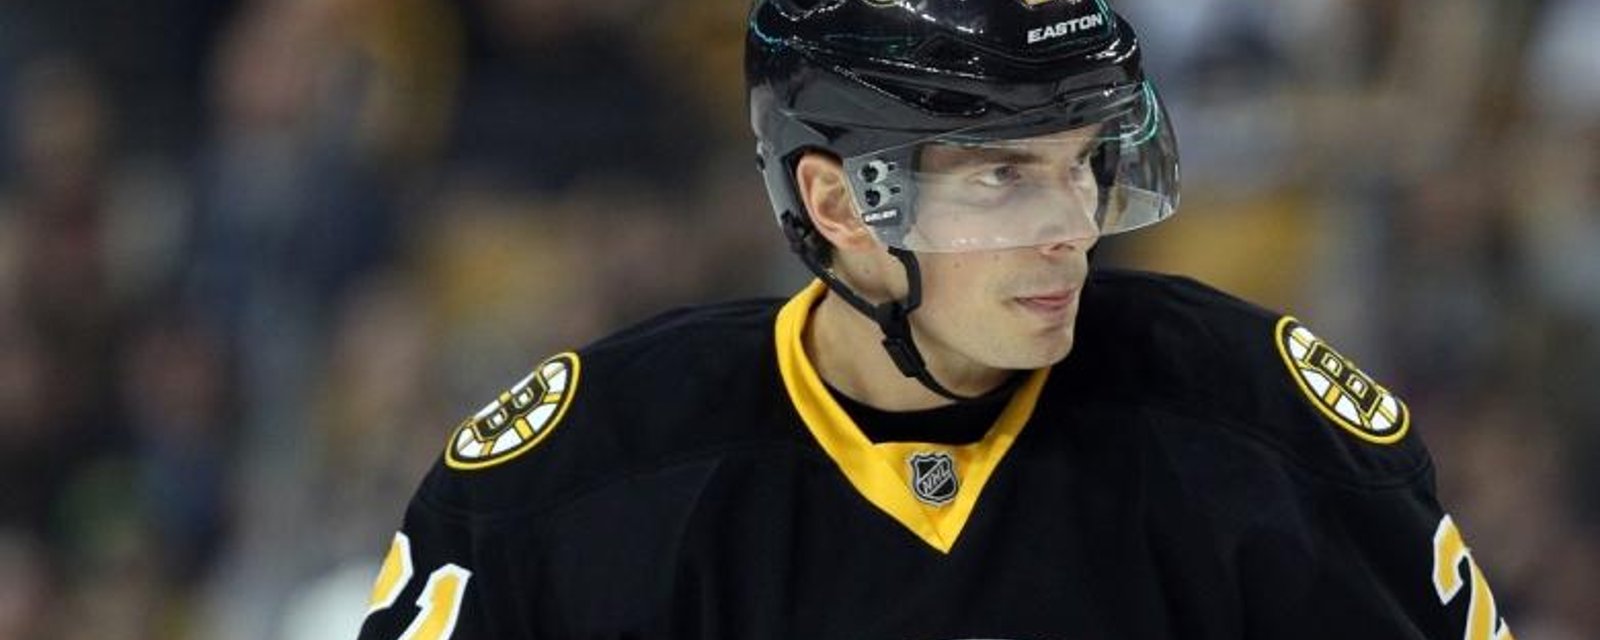 Breaking: Loui Eriksson has officially left Boston, signs with a new team.